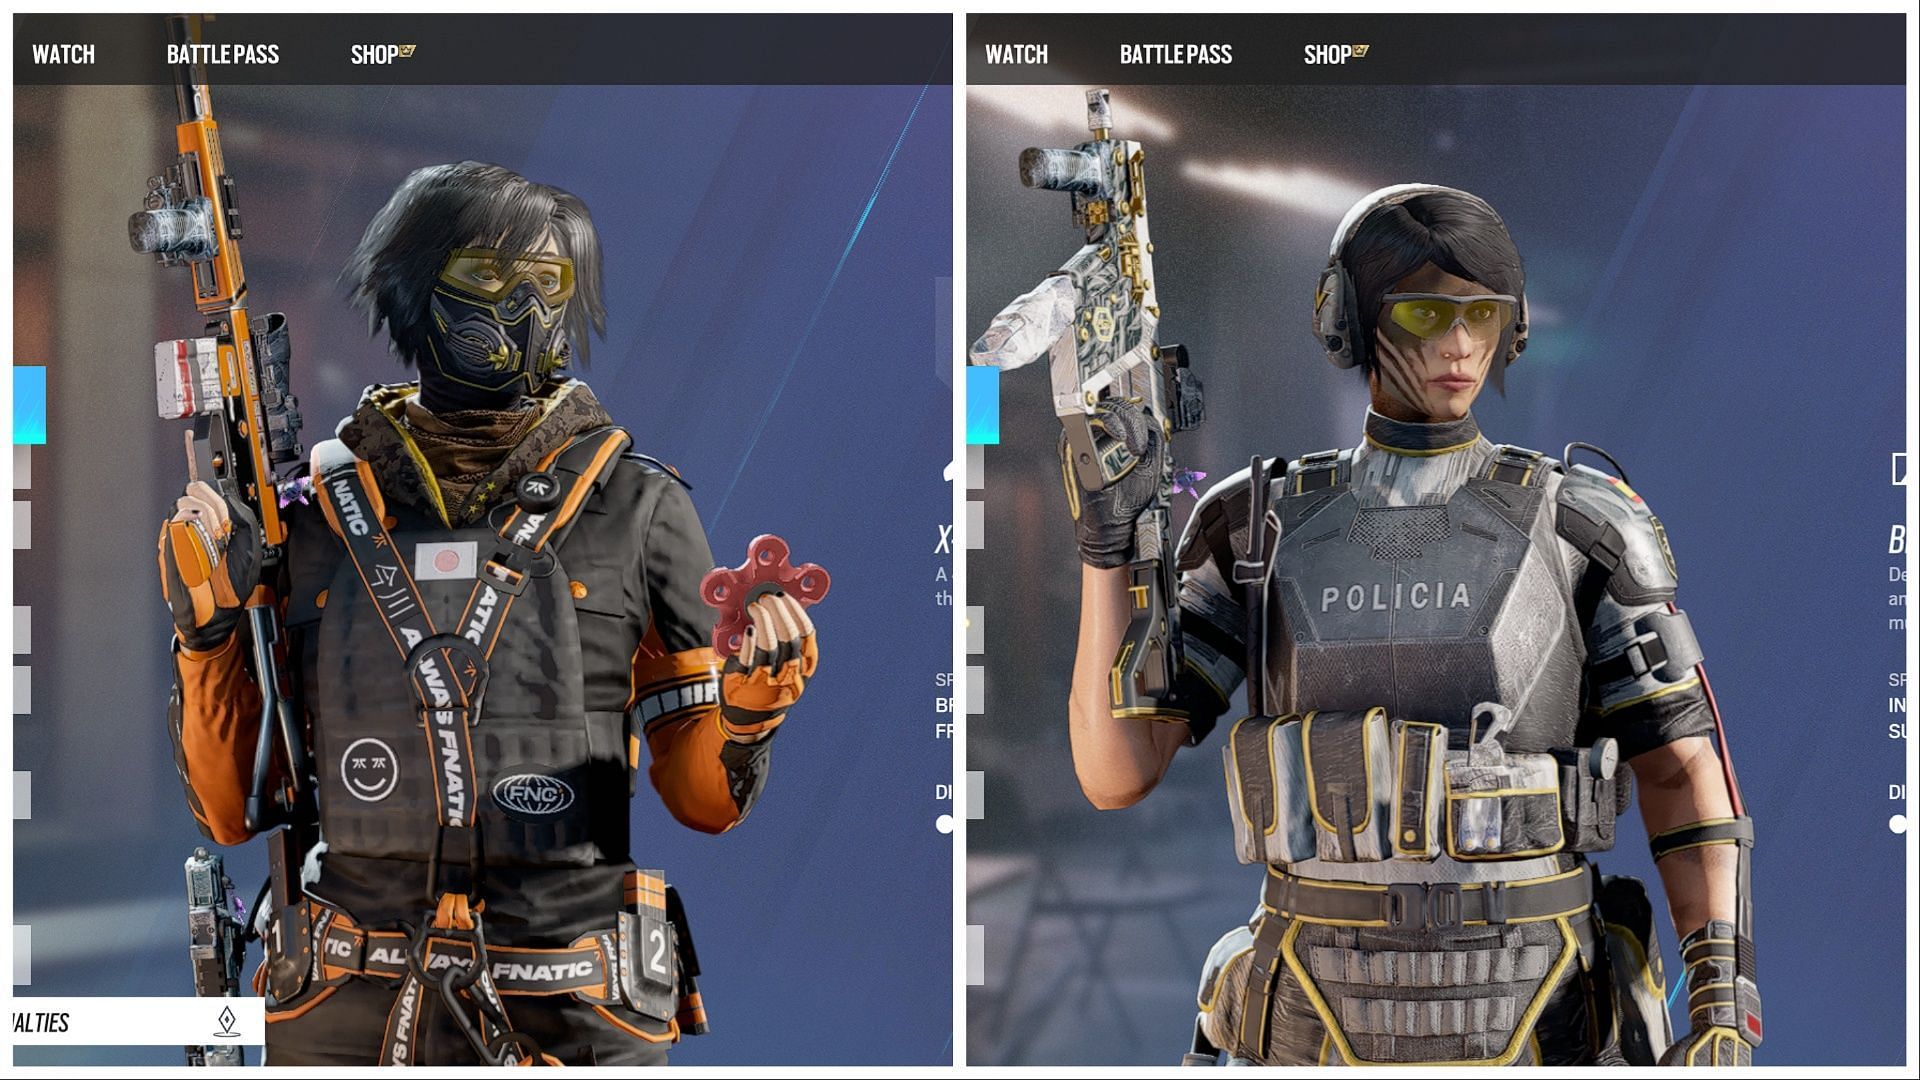 Hibana and Mira are the top Top Attacker and Defender picks for Bank (Image via Ubisoft)